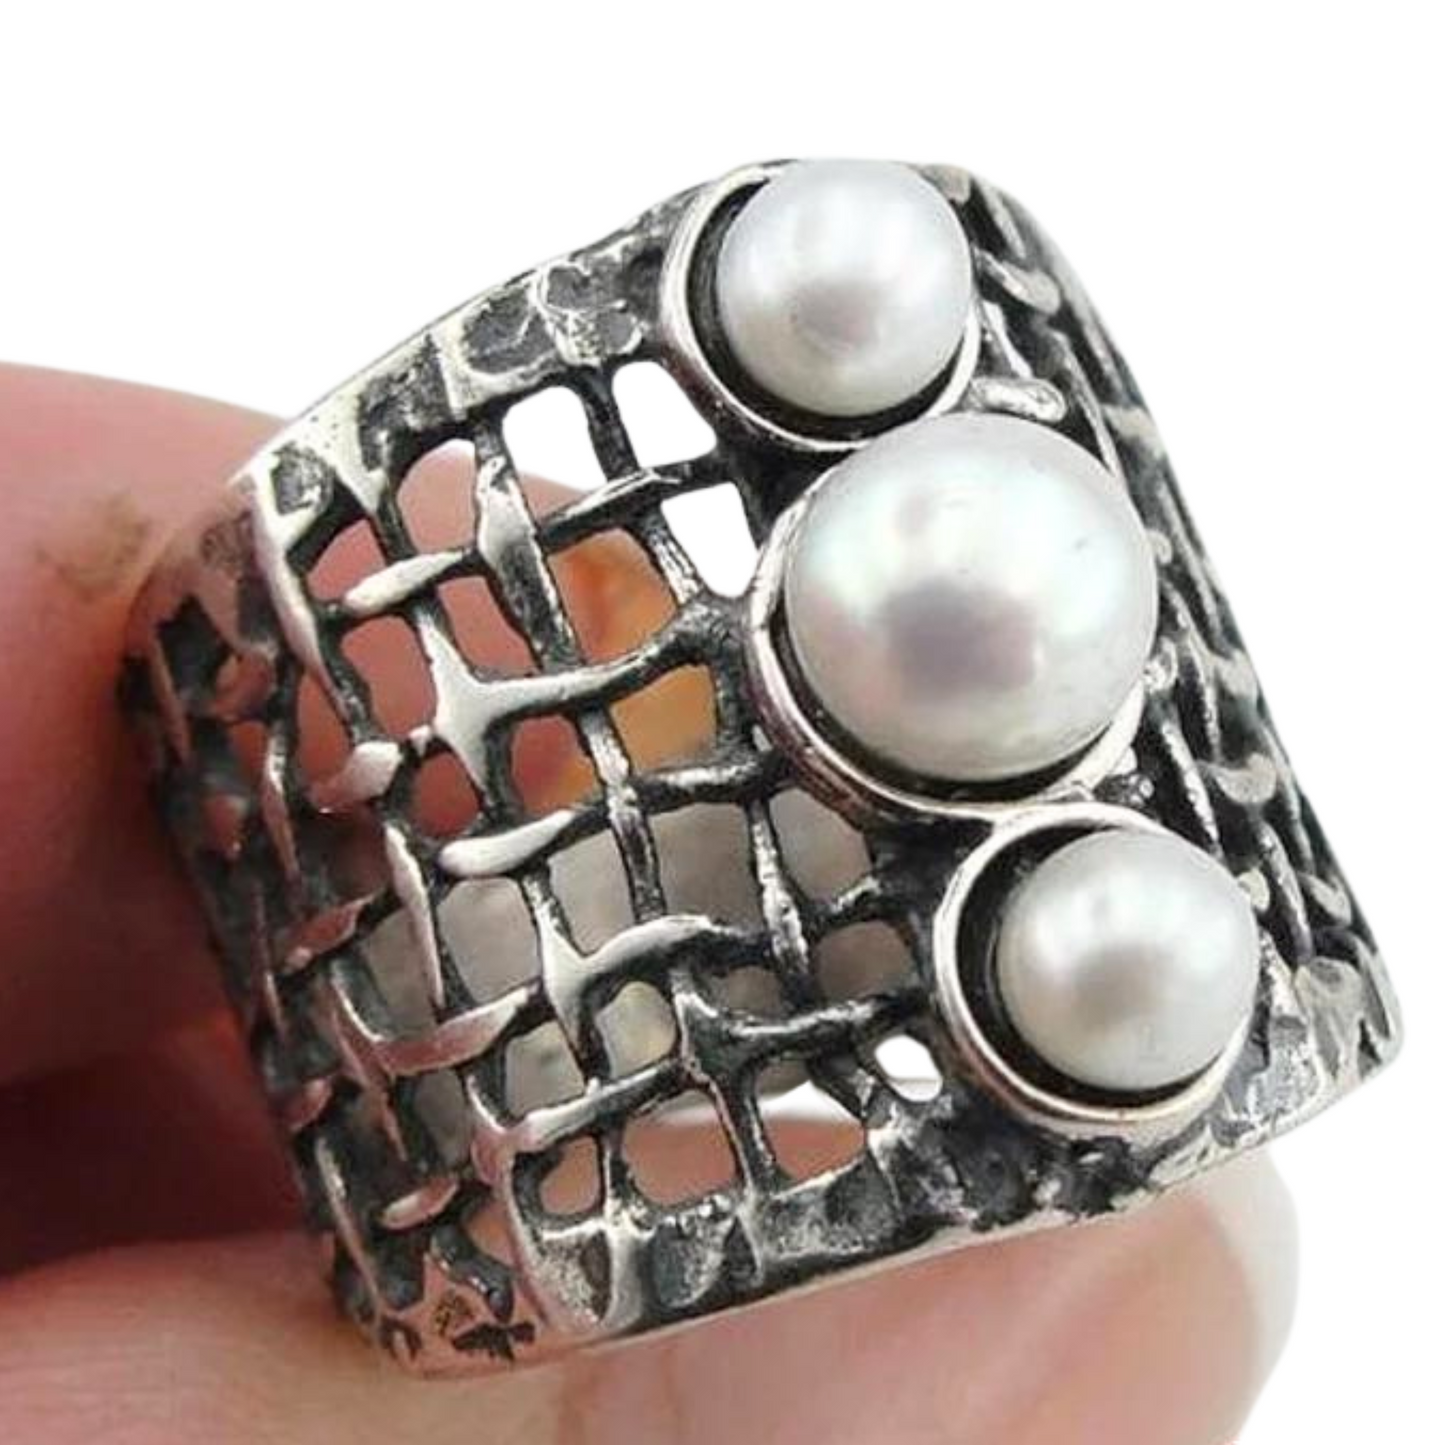 Net sterling silver Ring With Natural pearls, Blacked Silver